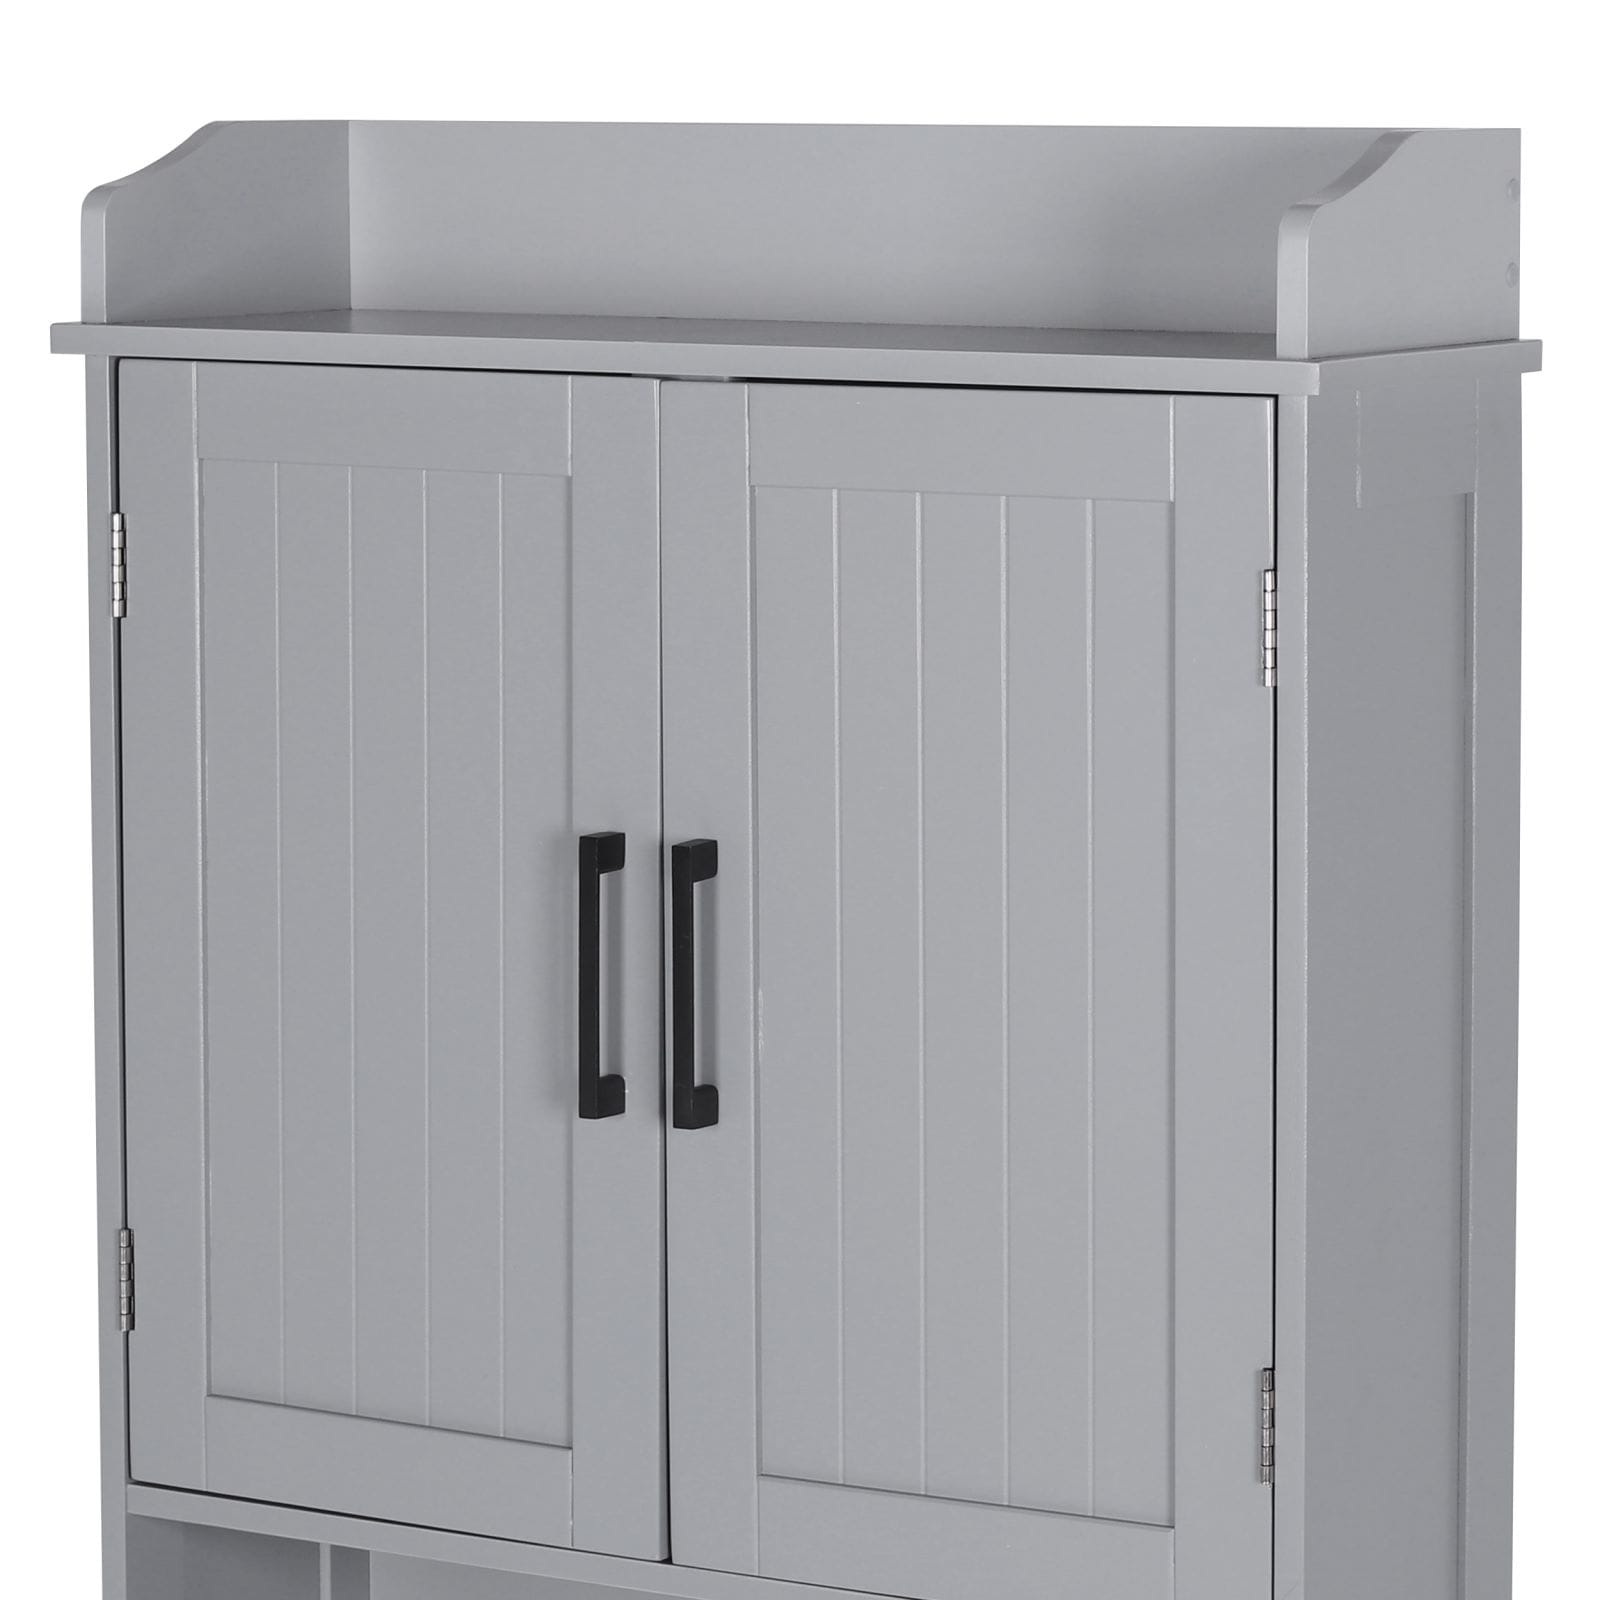 https://ak1.ostkcdn.com/images/products/is/images/direct/670637f94b5b3ca47befcfec4dbfc3d7f5fc3256/VEIKOUS-Over-The-Toilet-Storage-Cabinet-Bathroom-Organizer-with-Shelf-and-Cupboard.jpg